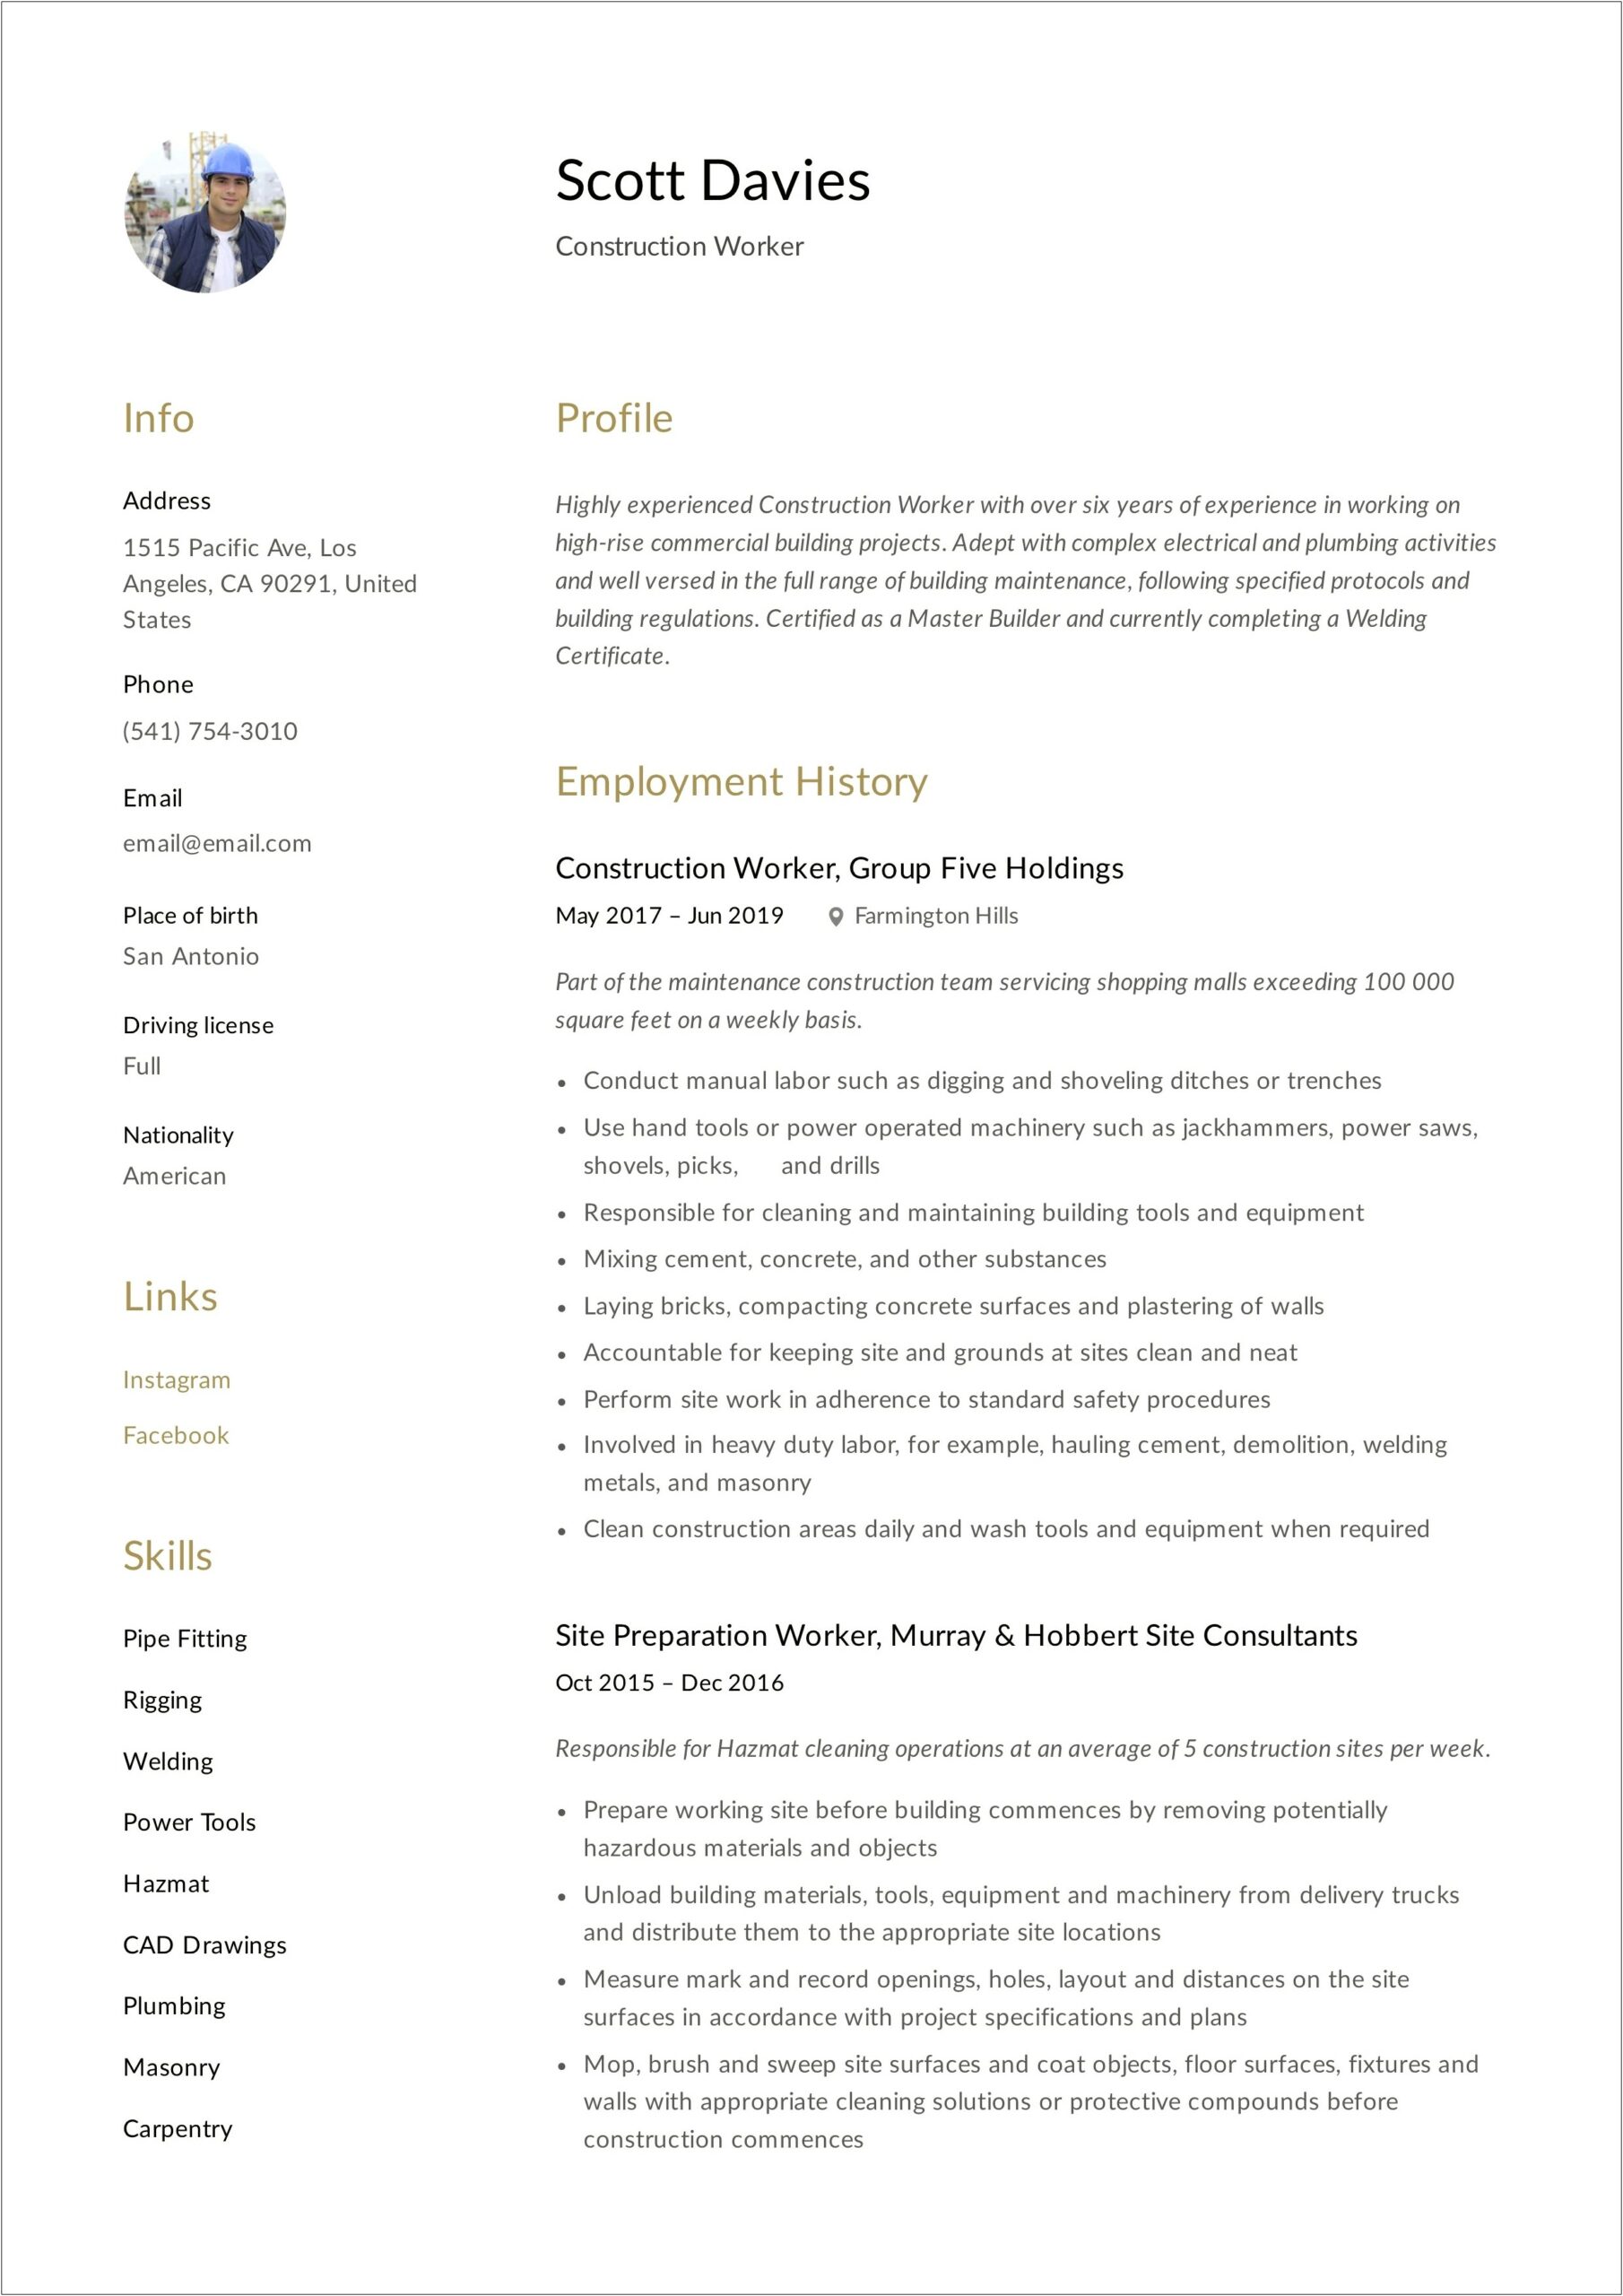 Resume Skills Examples For Construction